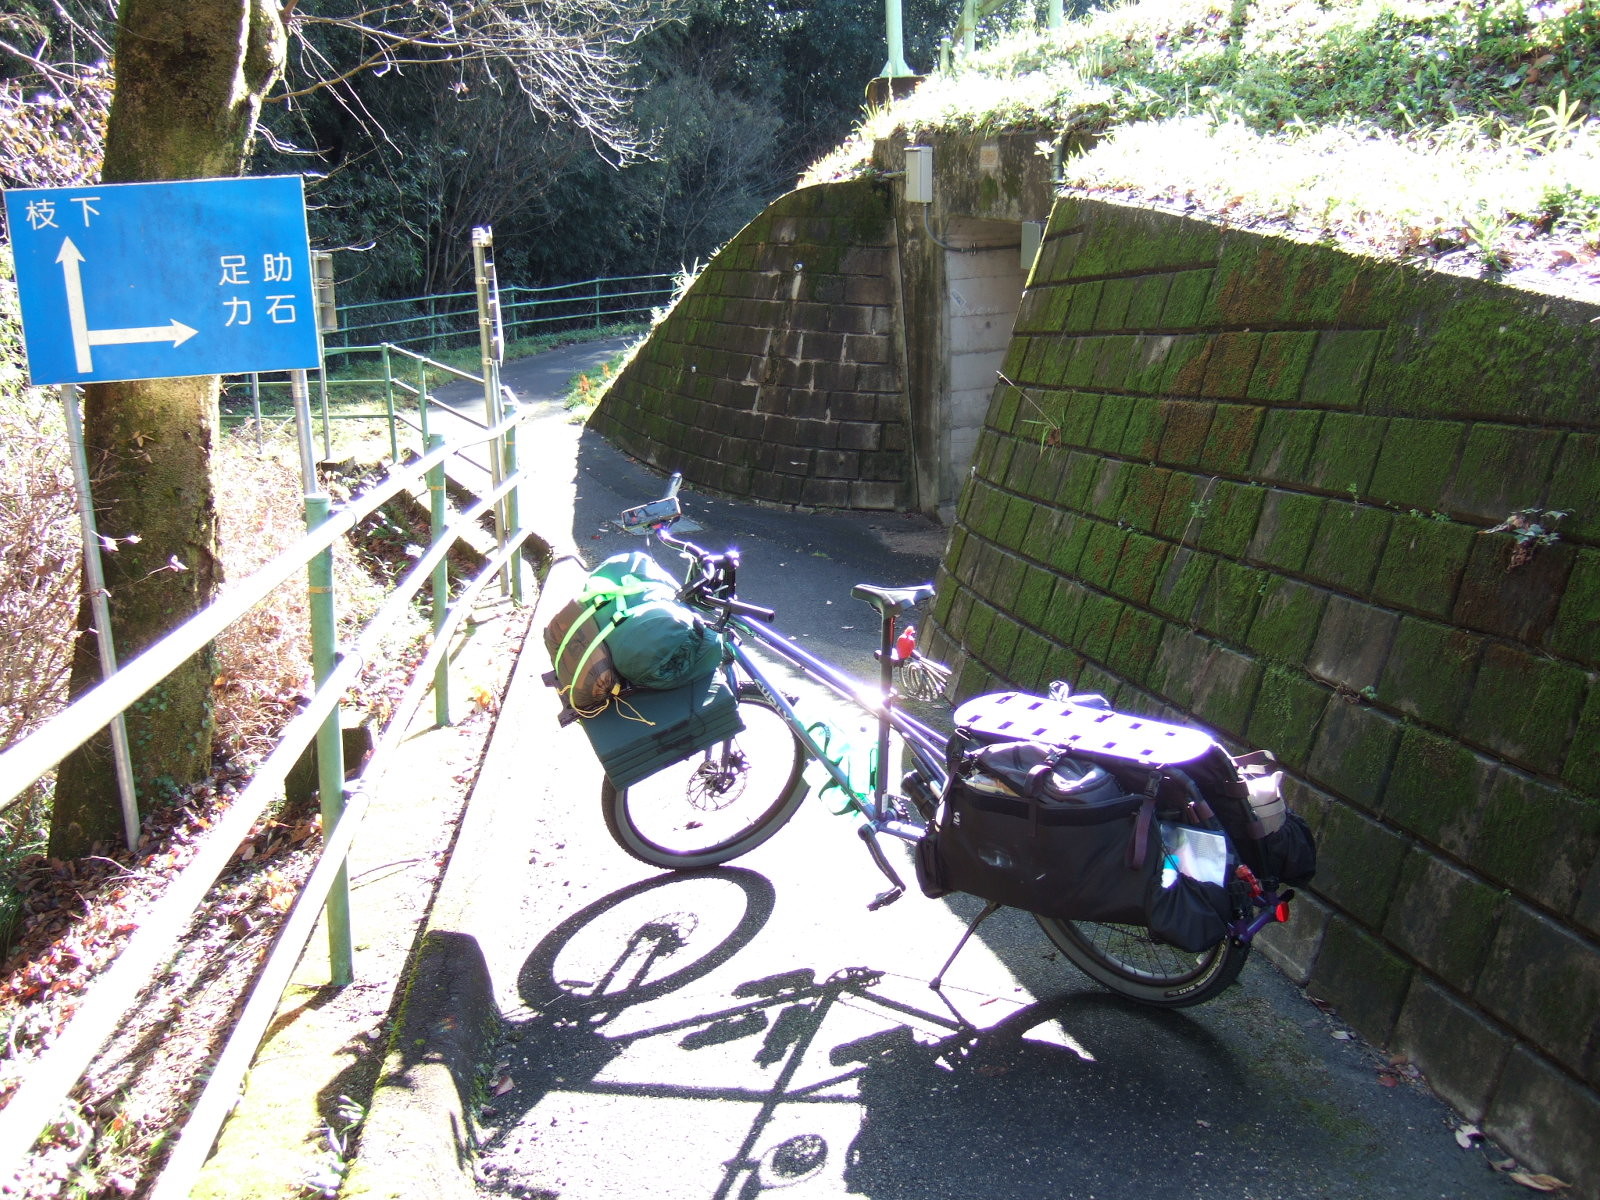 A loaded cargo bike parked in a narrow paved pathway, with a steep stonework embankment on its right. The entrance to a tunnel under the embankment is to the right, and there is a sign to the left of the path with arrows indicating destinations Sanage (猿投) straight on, and Asuke (足助) and Chikaraishi (力石) to the right through the tunnel.